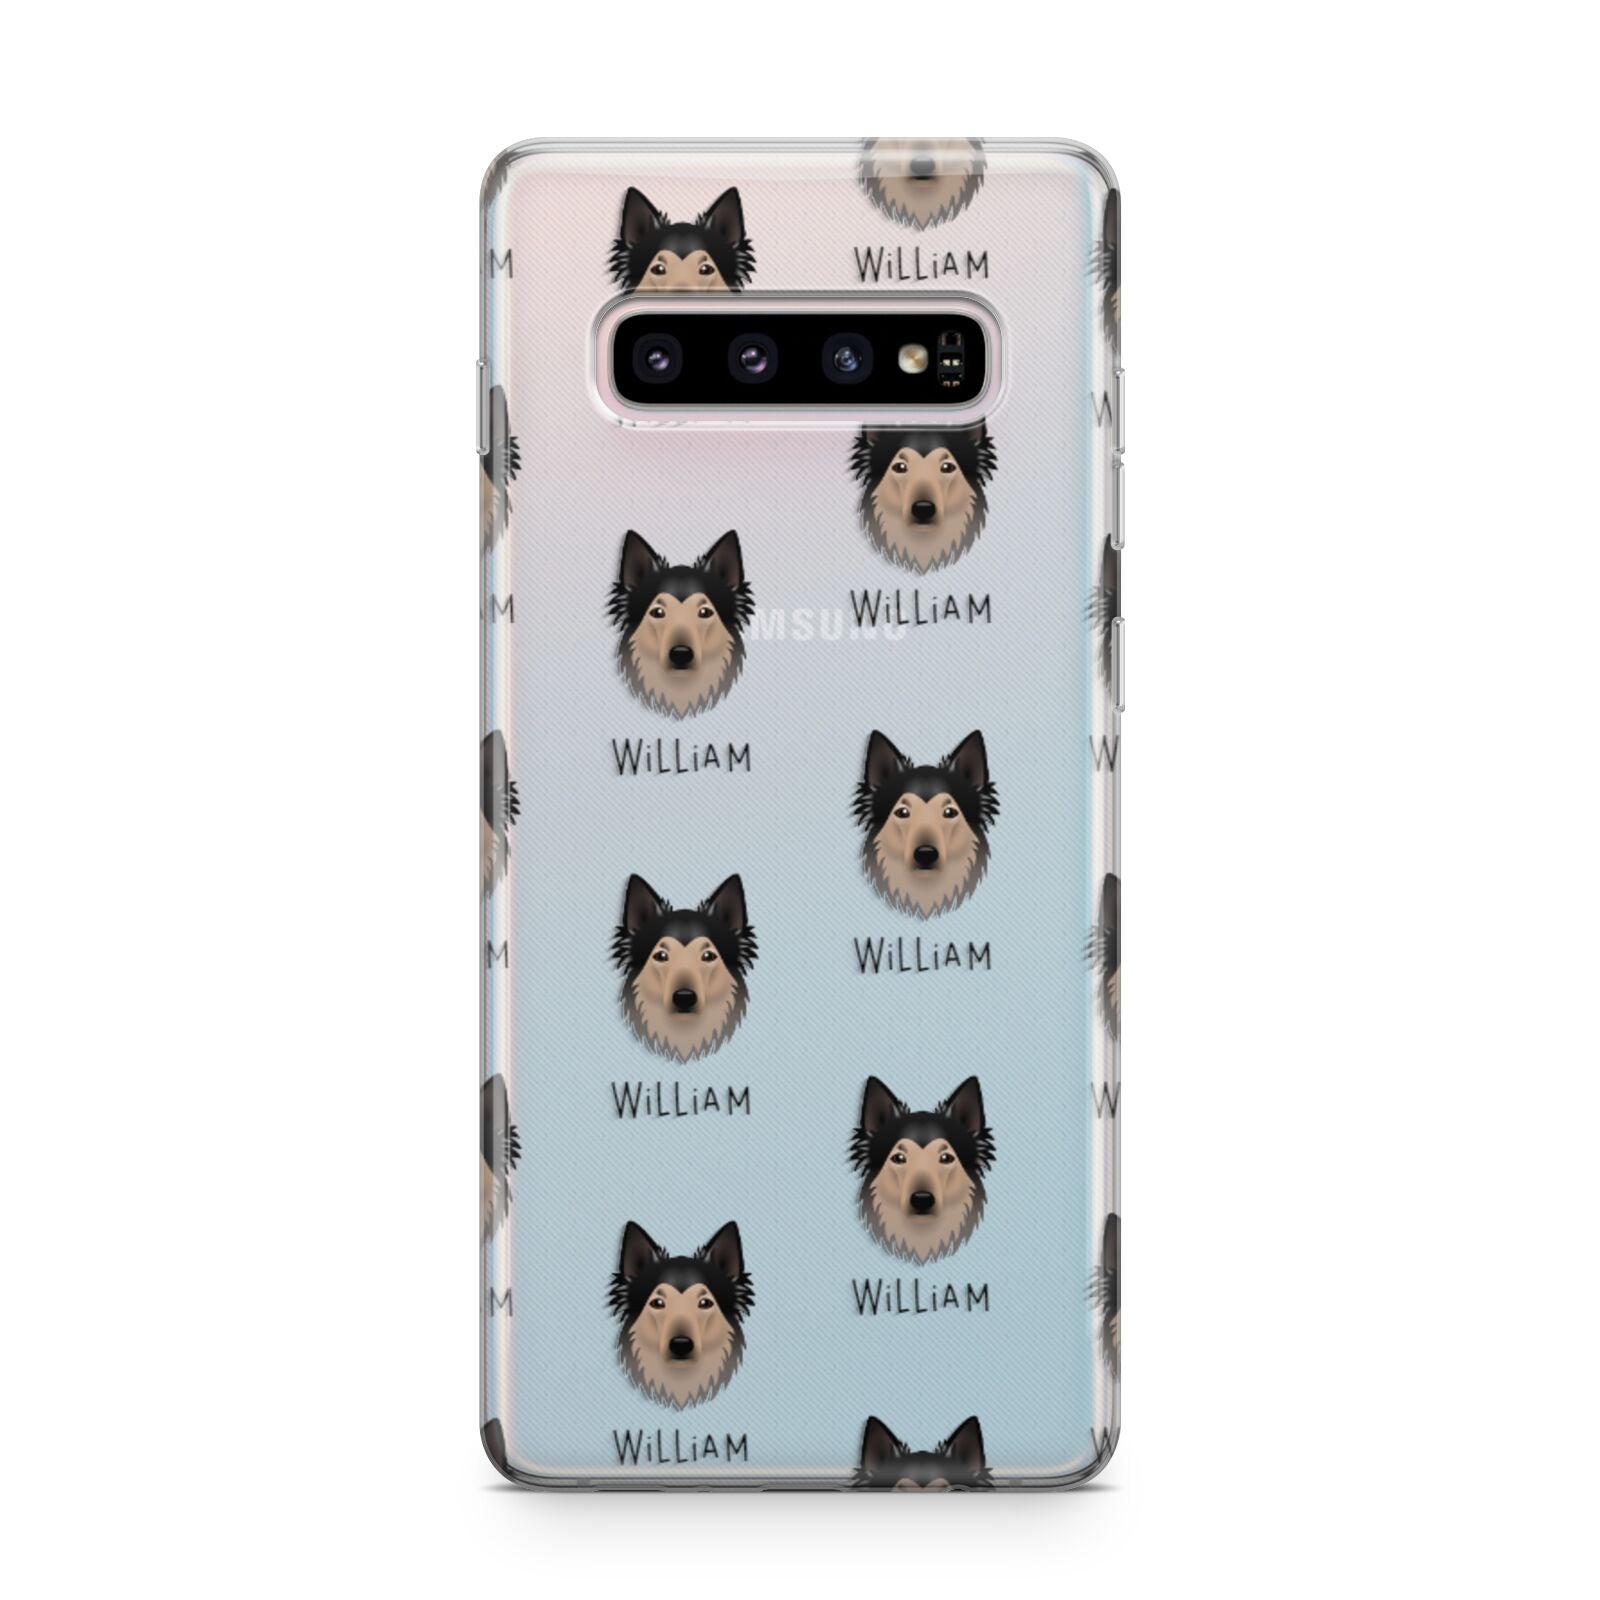 Shollie Icon with Name Samsung Galaxy S10 Plus Case